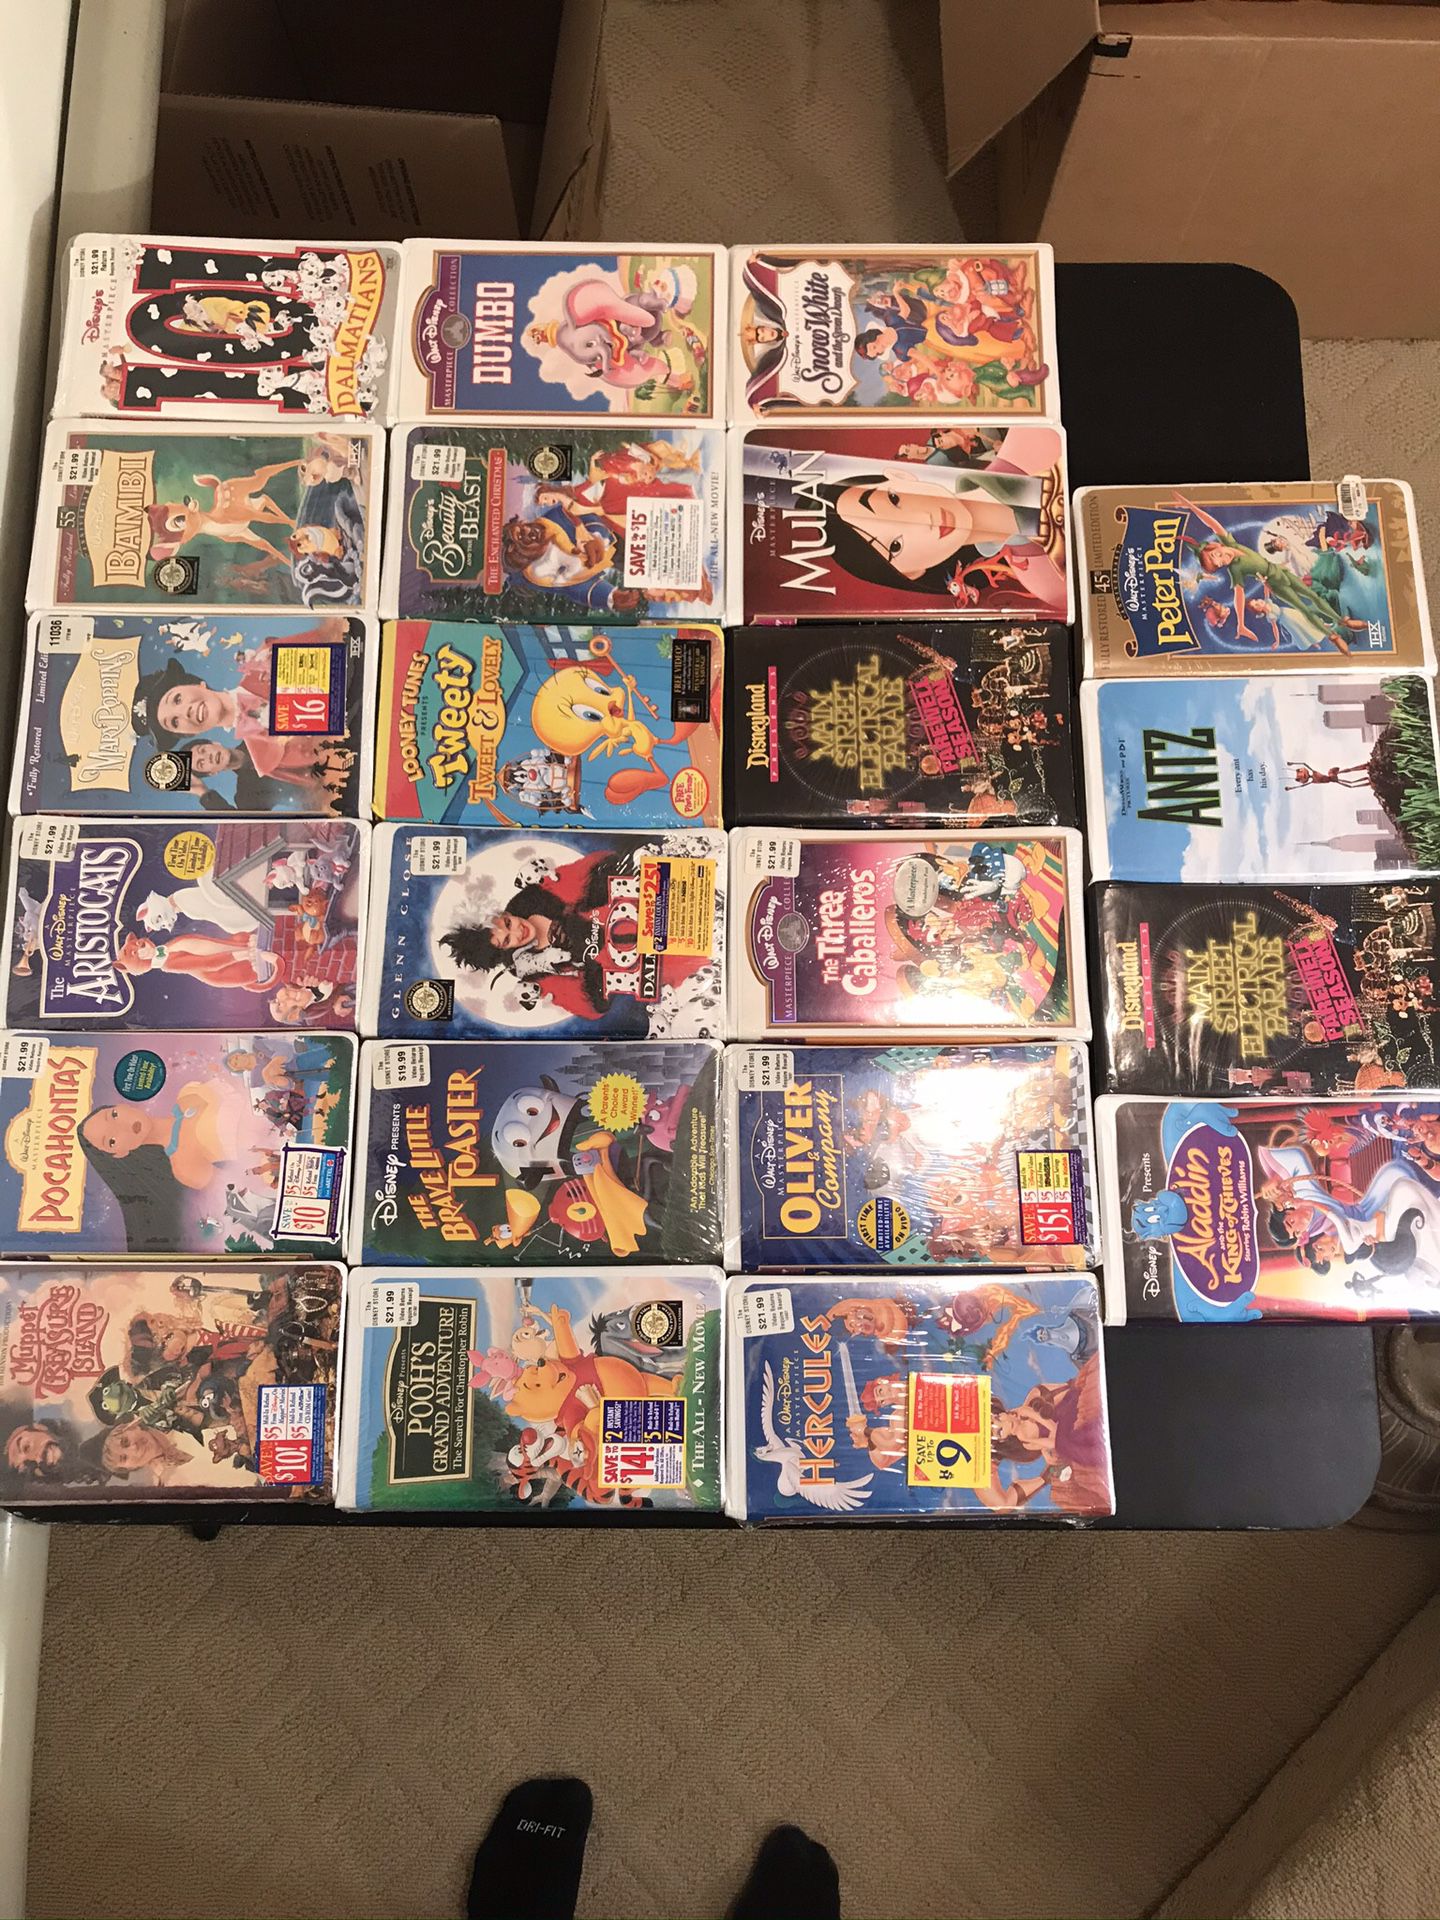 Disney VHS videos variety and most are brand new